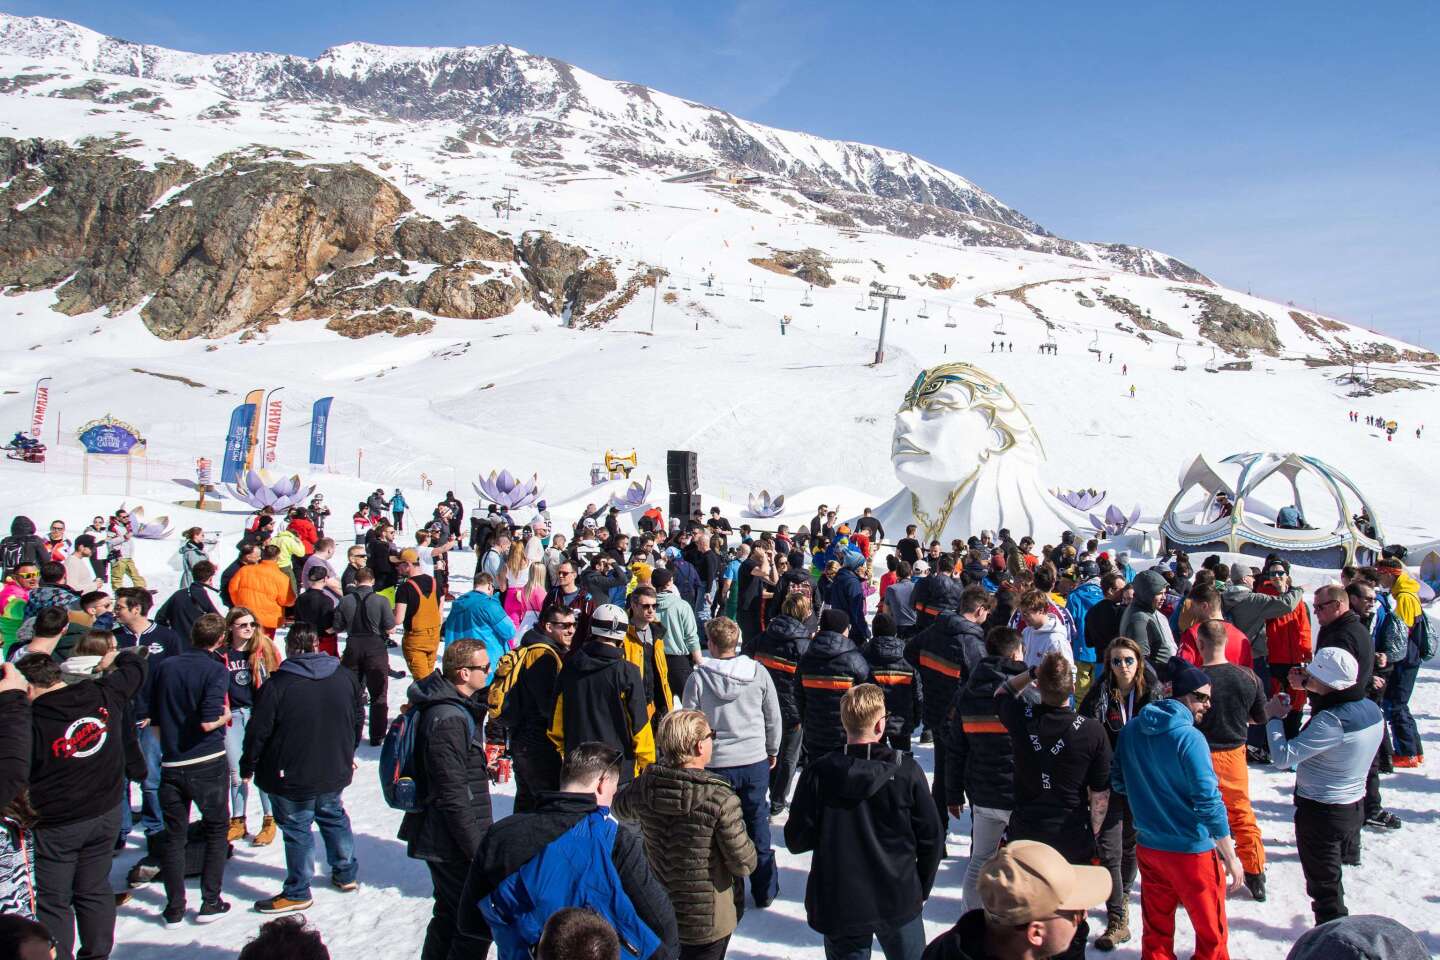 With the Tomorrowland festival, the resort of Alpe-d’Huez is ready to do anything to attract new customers